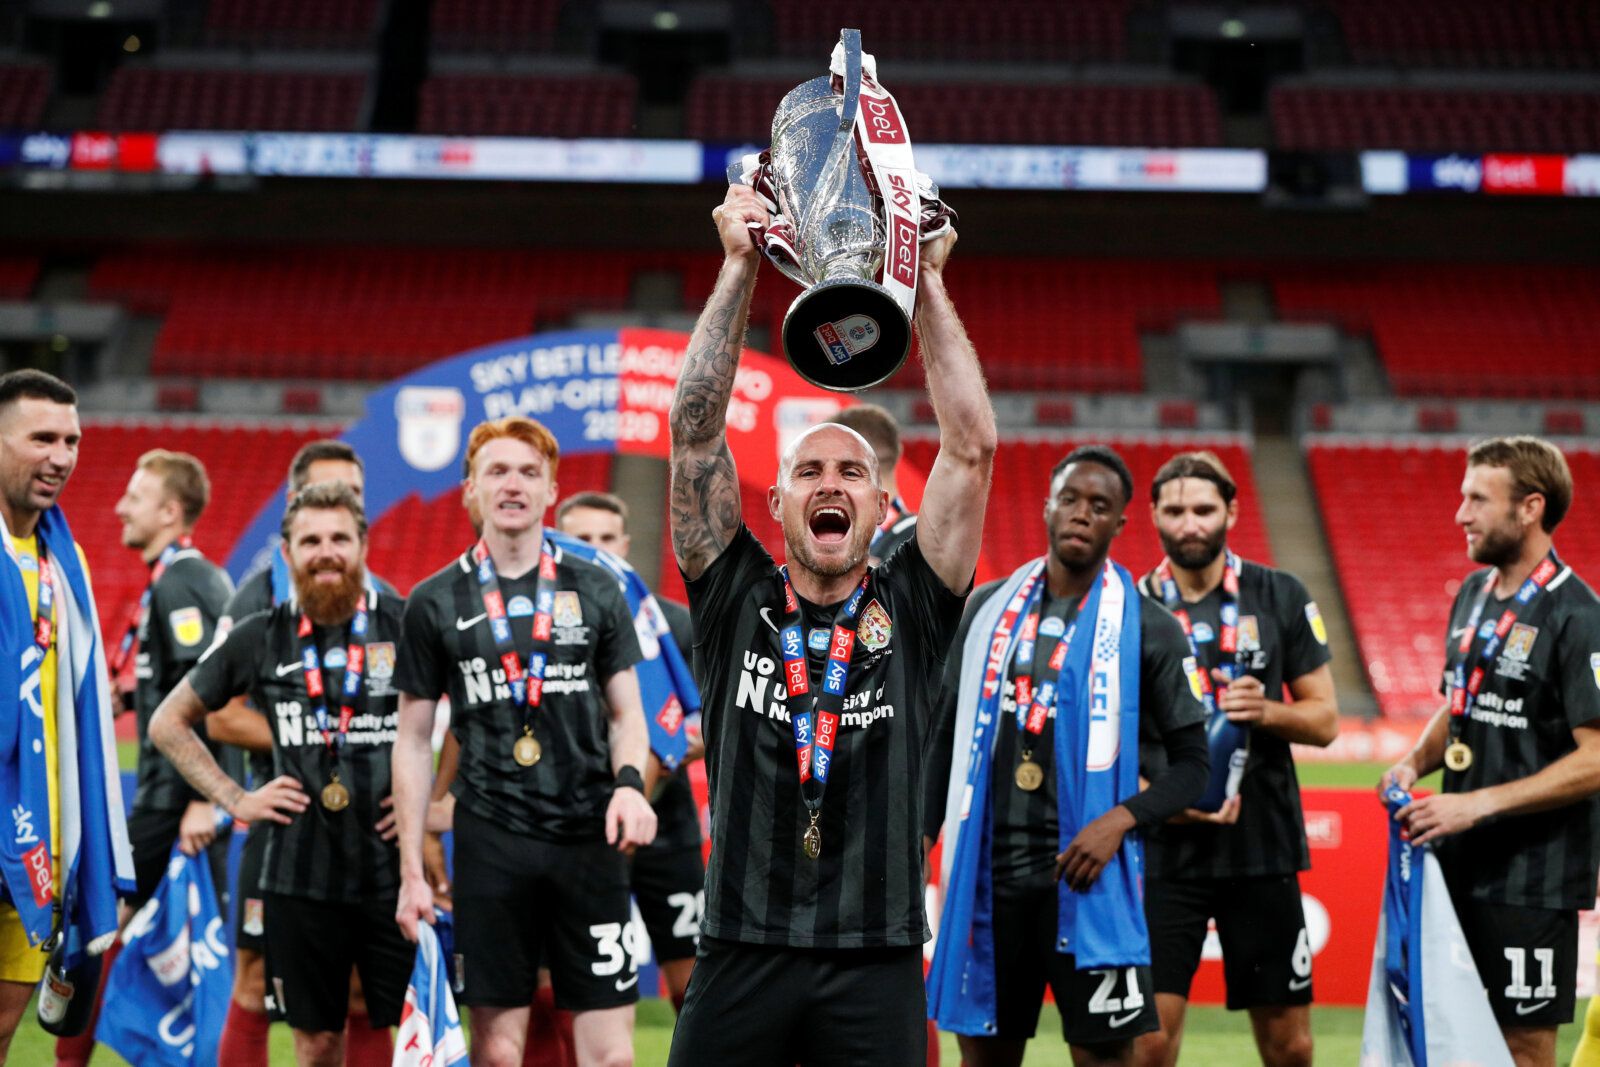 Soccer Football - League Two Play-Off Final - Exeter City v Northampton Town - Wembley Stadium, London, Britain - June 29, 2020   Northampton Town's Alan McCormack celebrates with the trophy after winning the League Two Play-Off Final, as play resumes behind closed doors following the outbreak of the coronavirus disease (COVID-19)   Action Images/John Sibley    EDITORIAL USE ONLY. No use with unauthorized audio, video, data, fixture lists, club/league logos or 